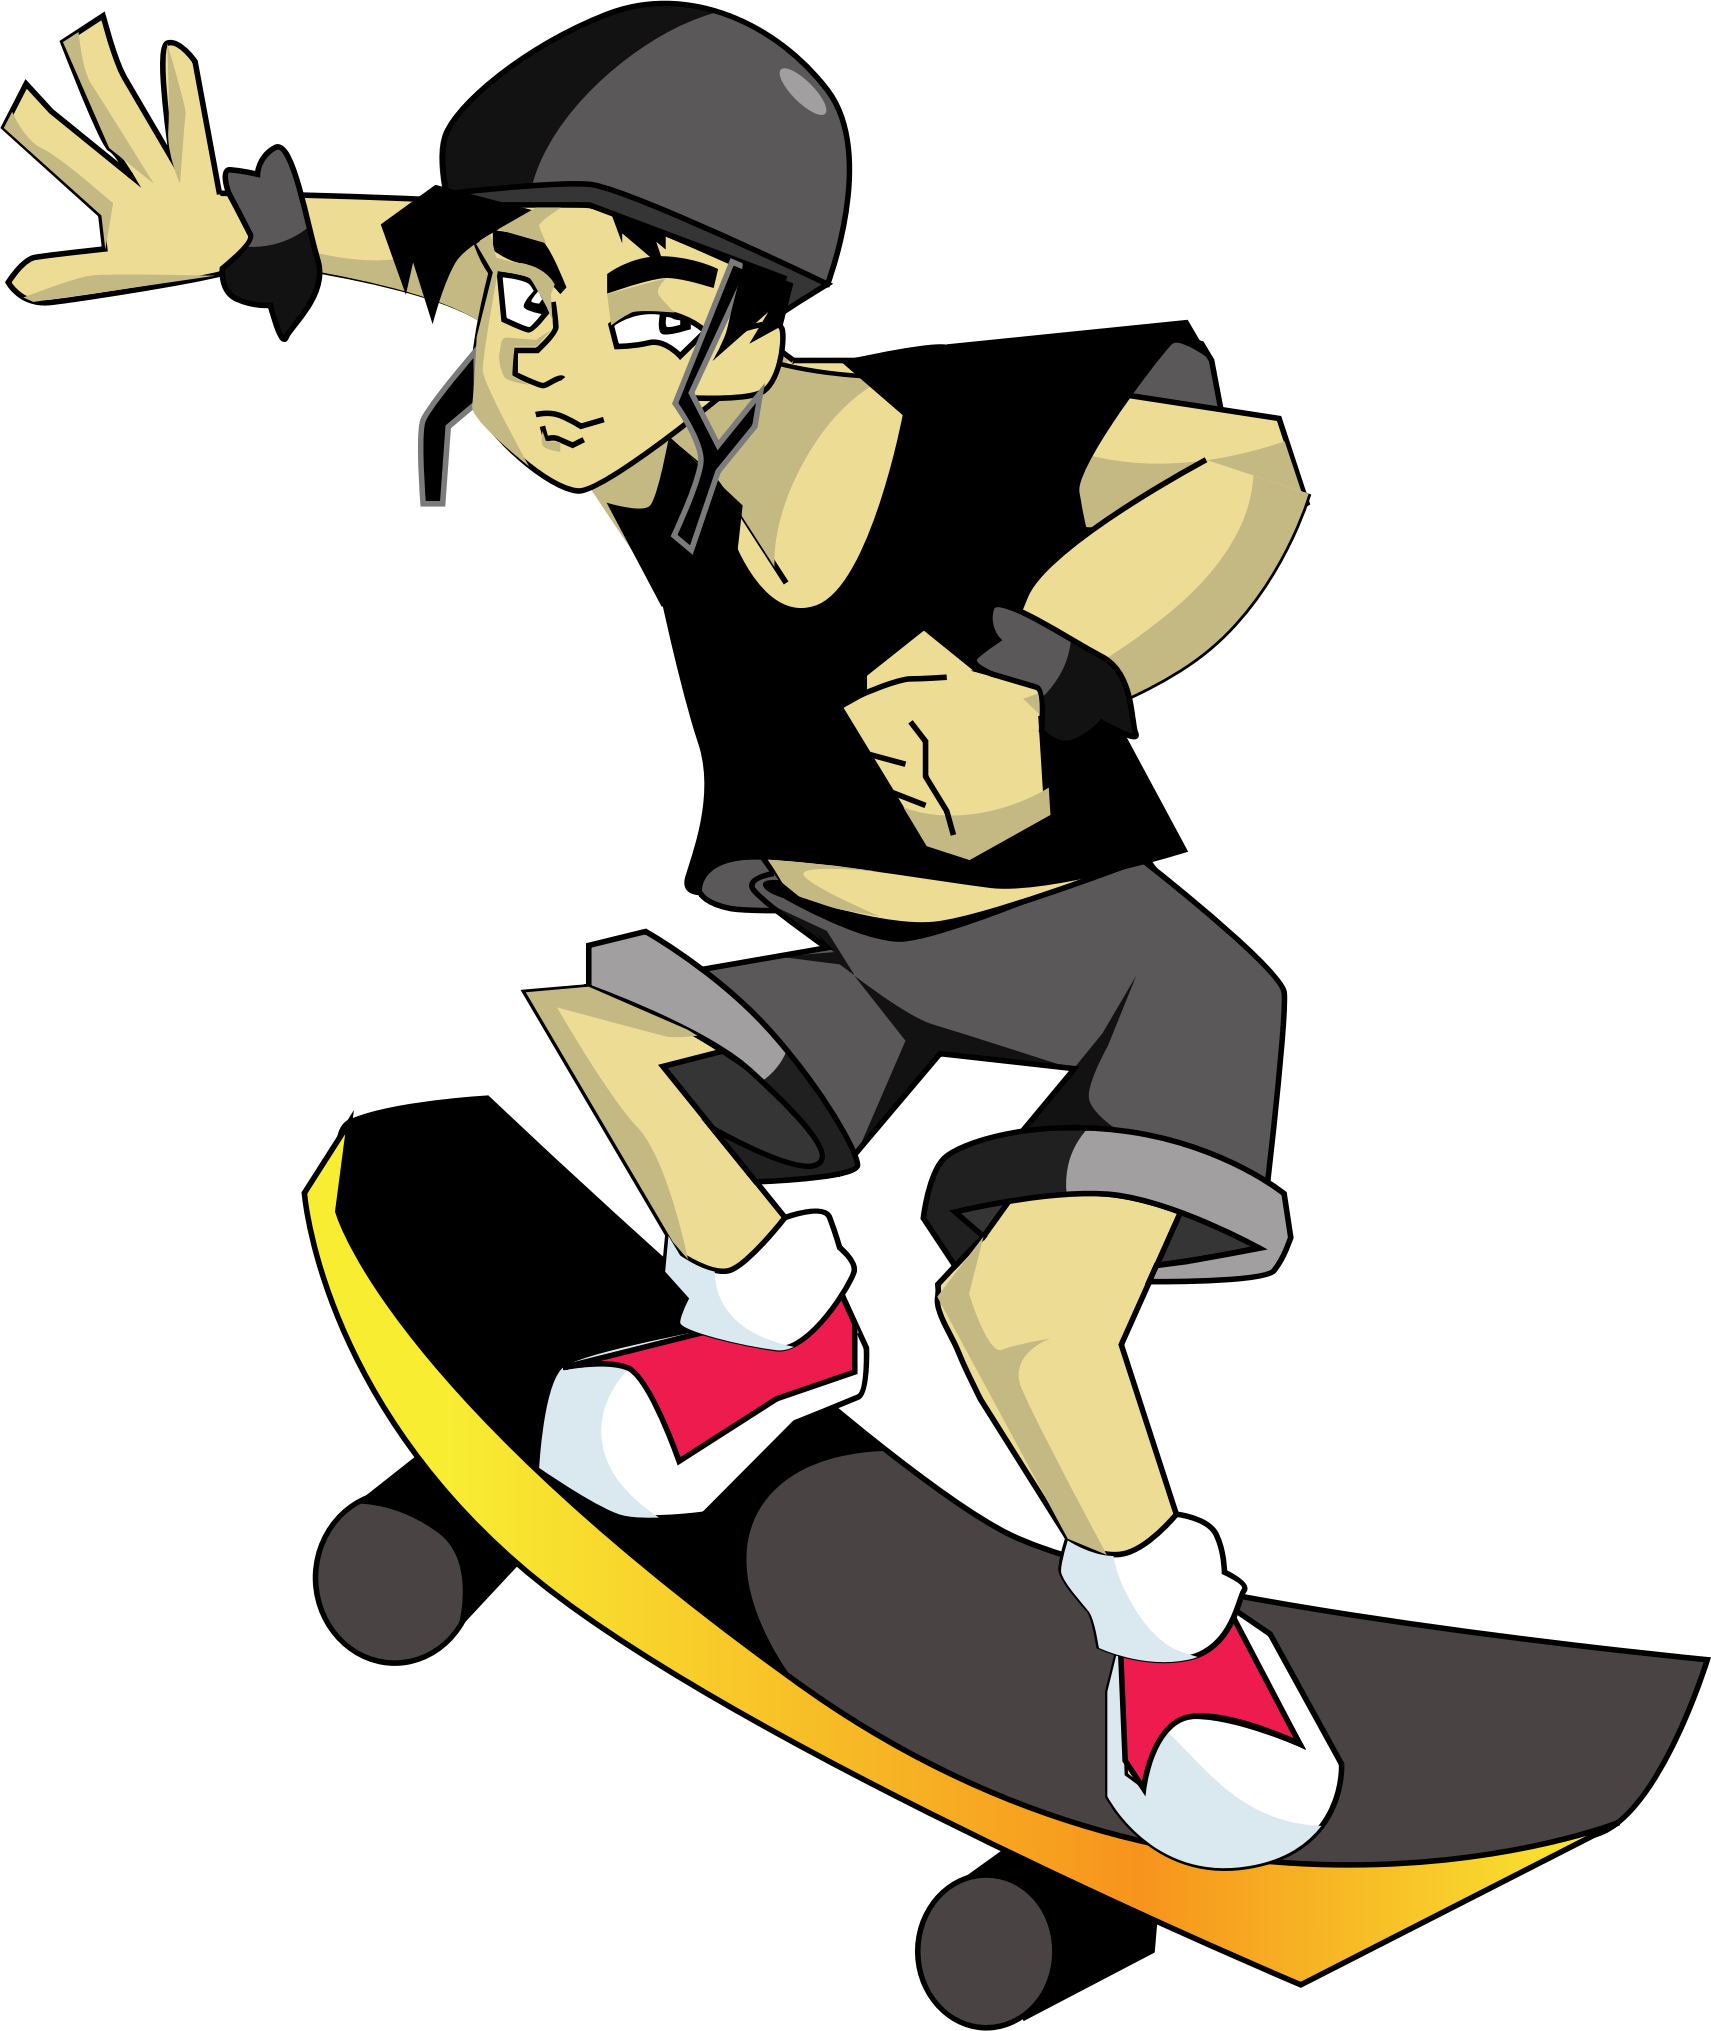 Red clipart skateboard. Skater icons png free